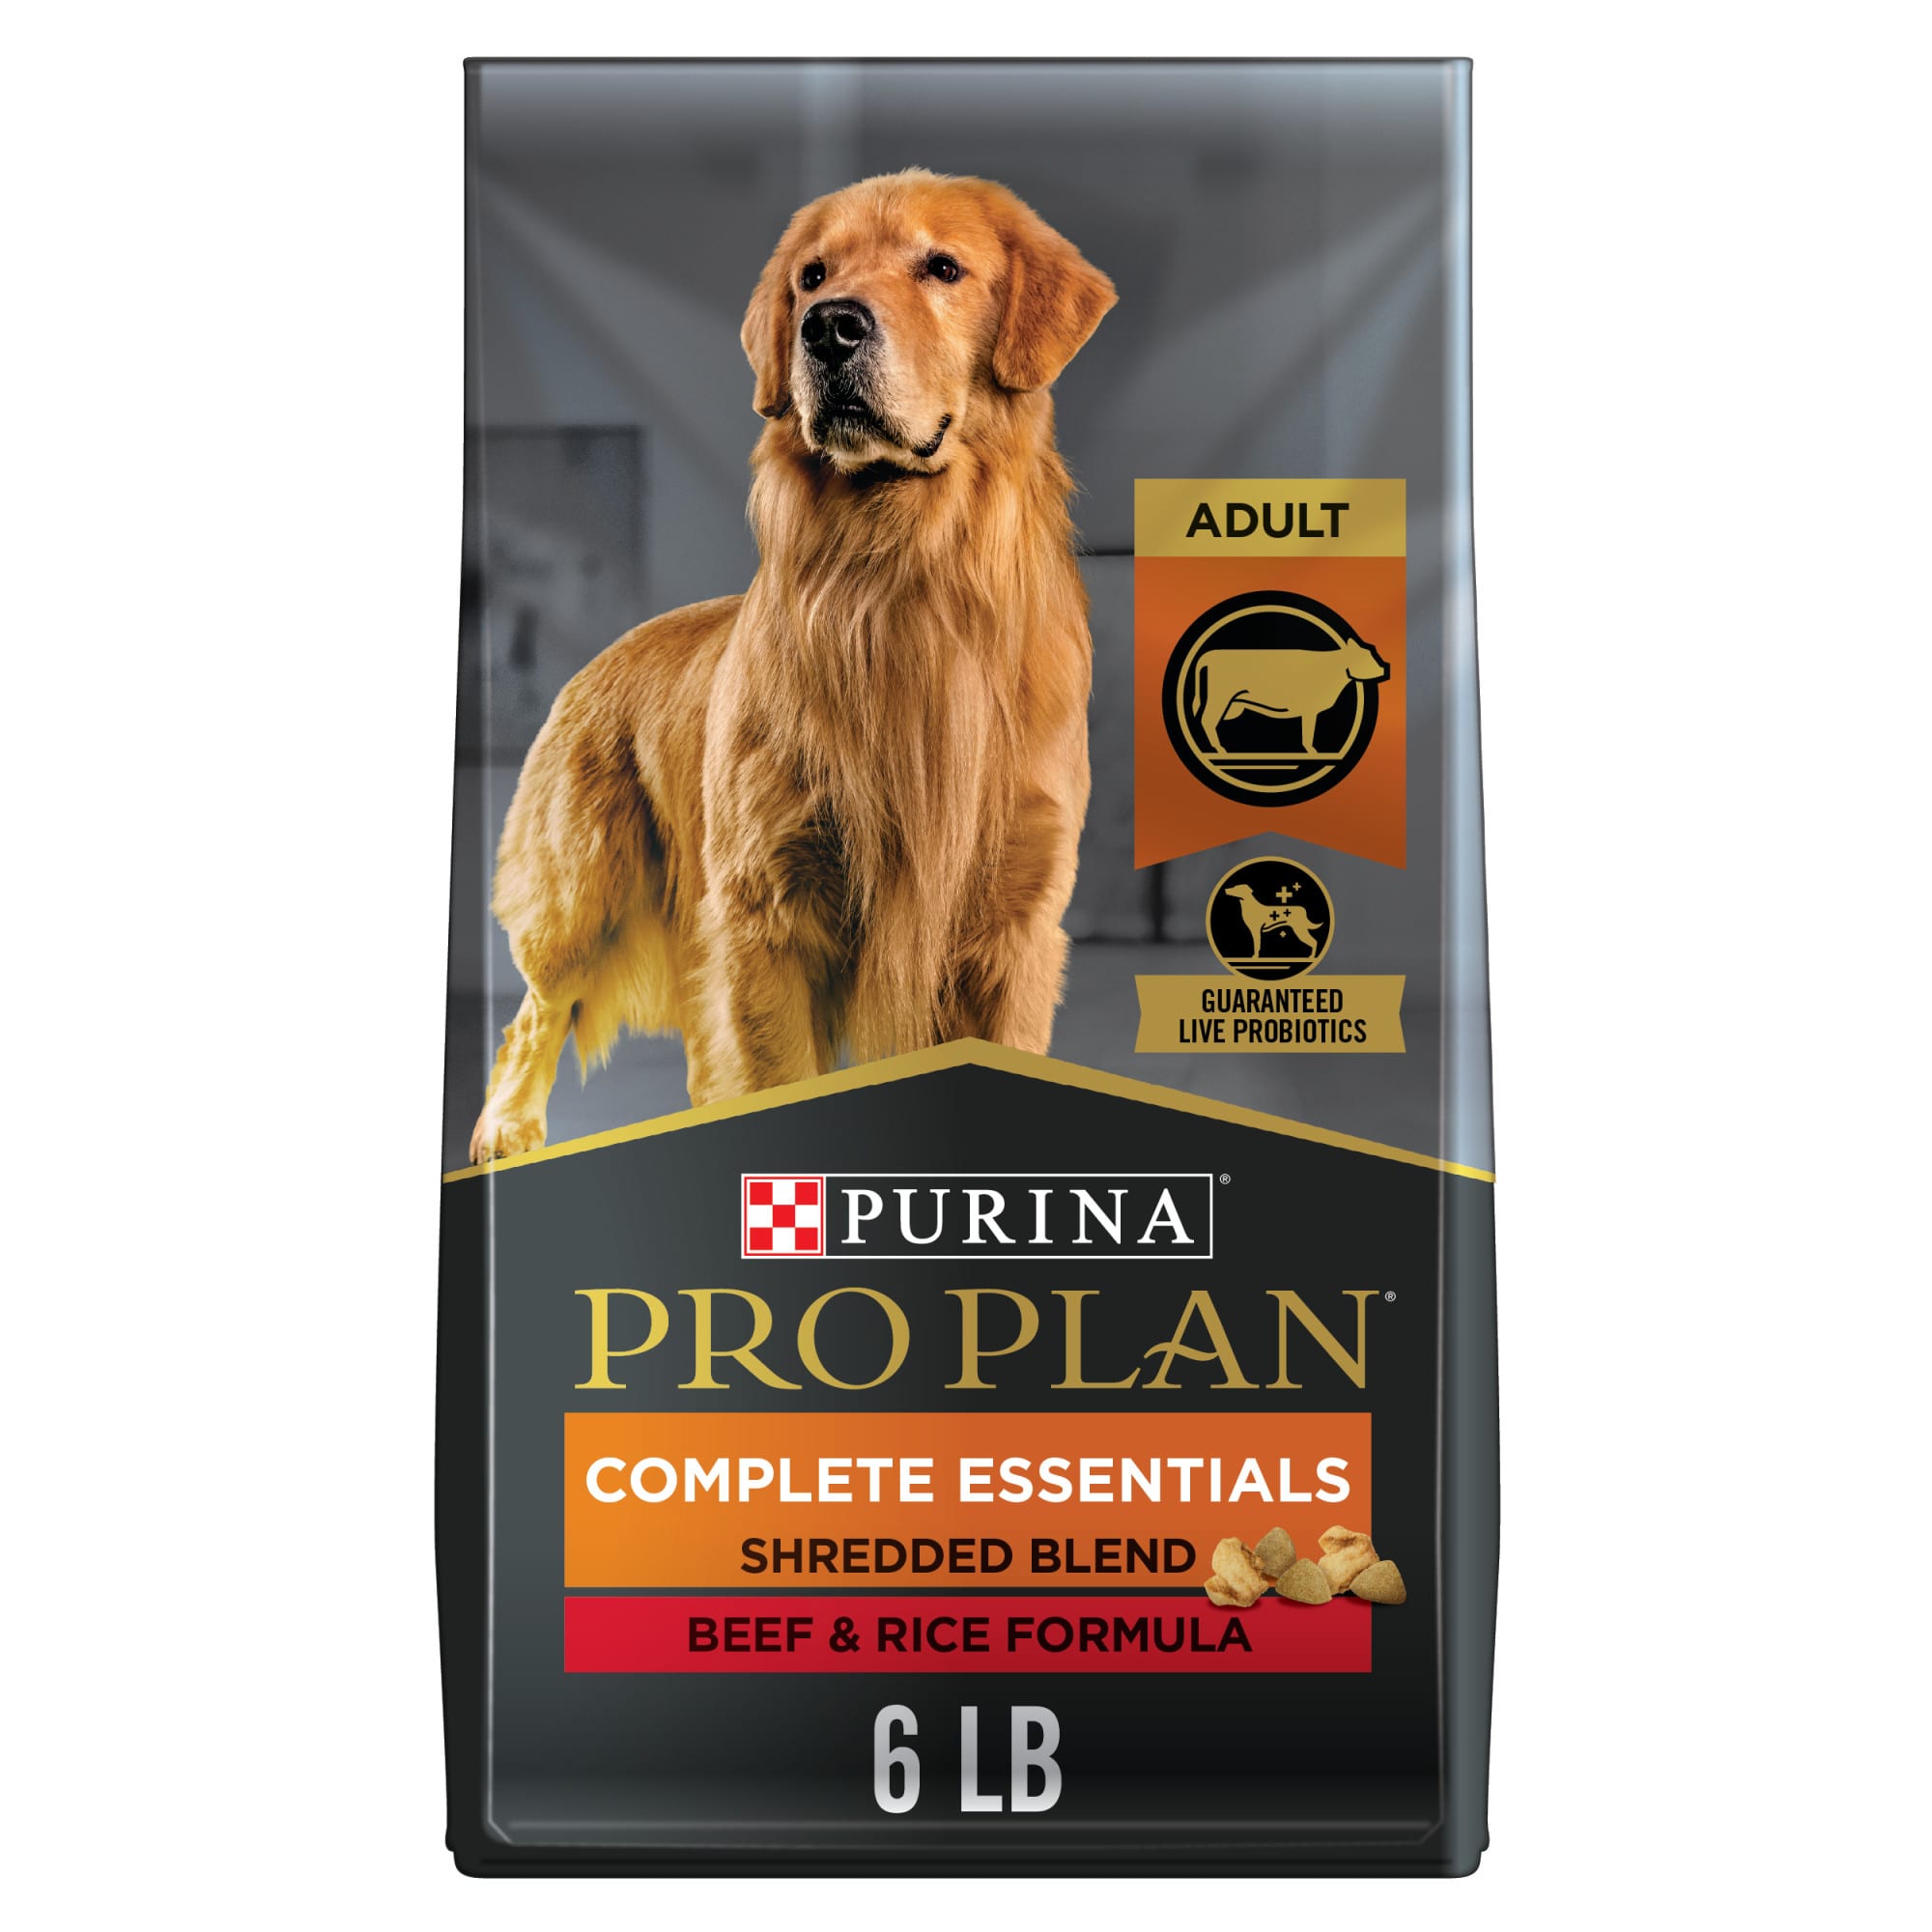 purina-pro-plan-high-protein-with-probiotics-shredded-blend-beef-rice